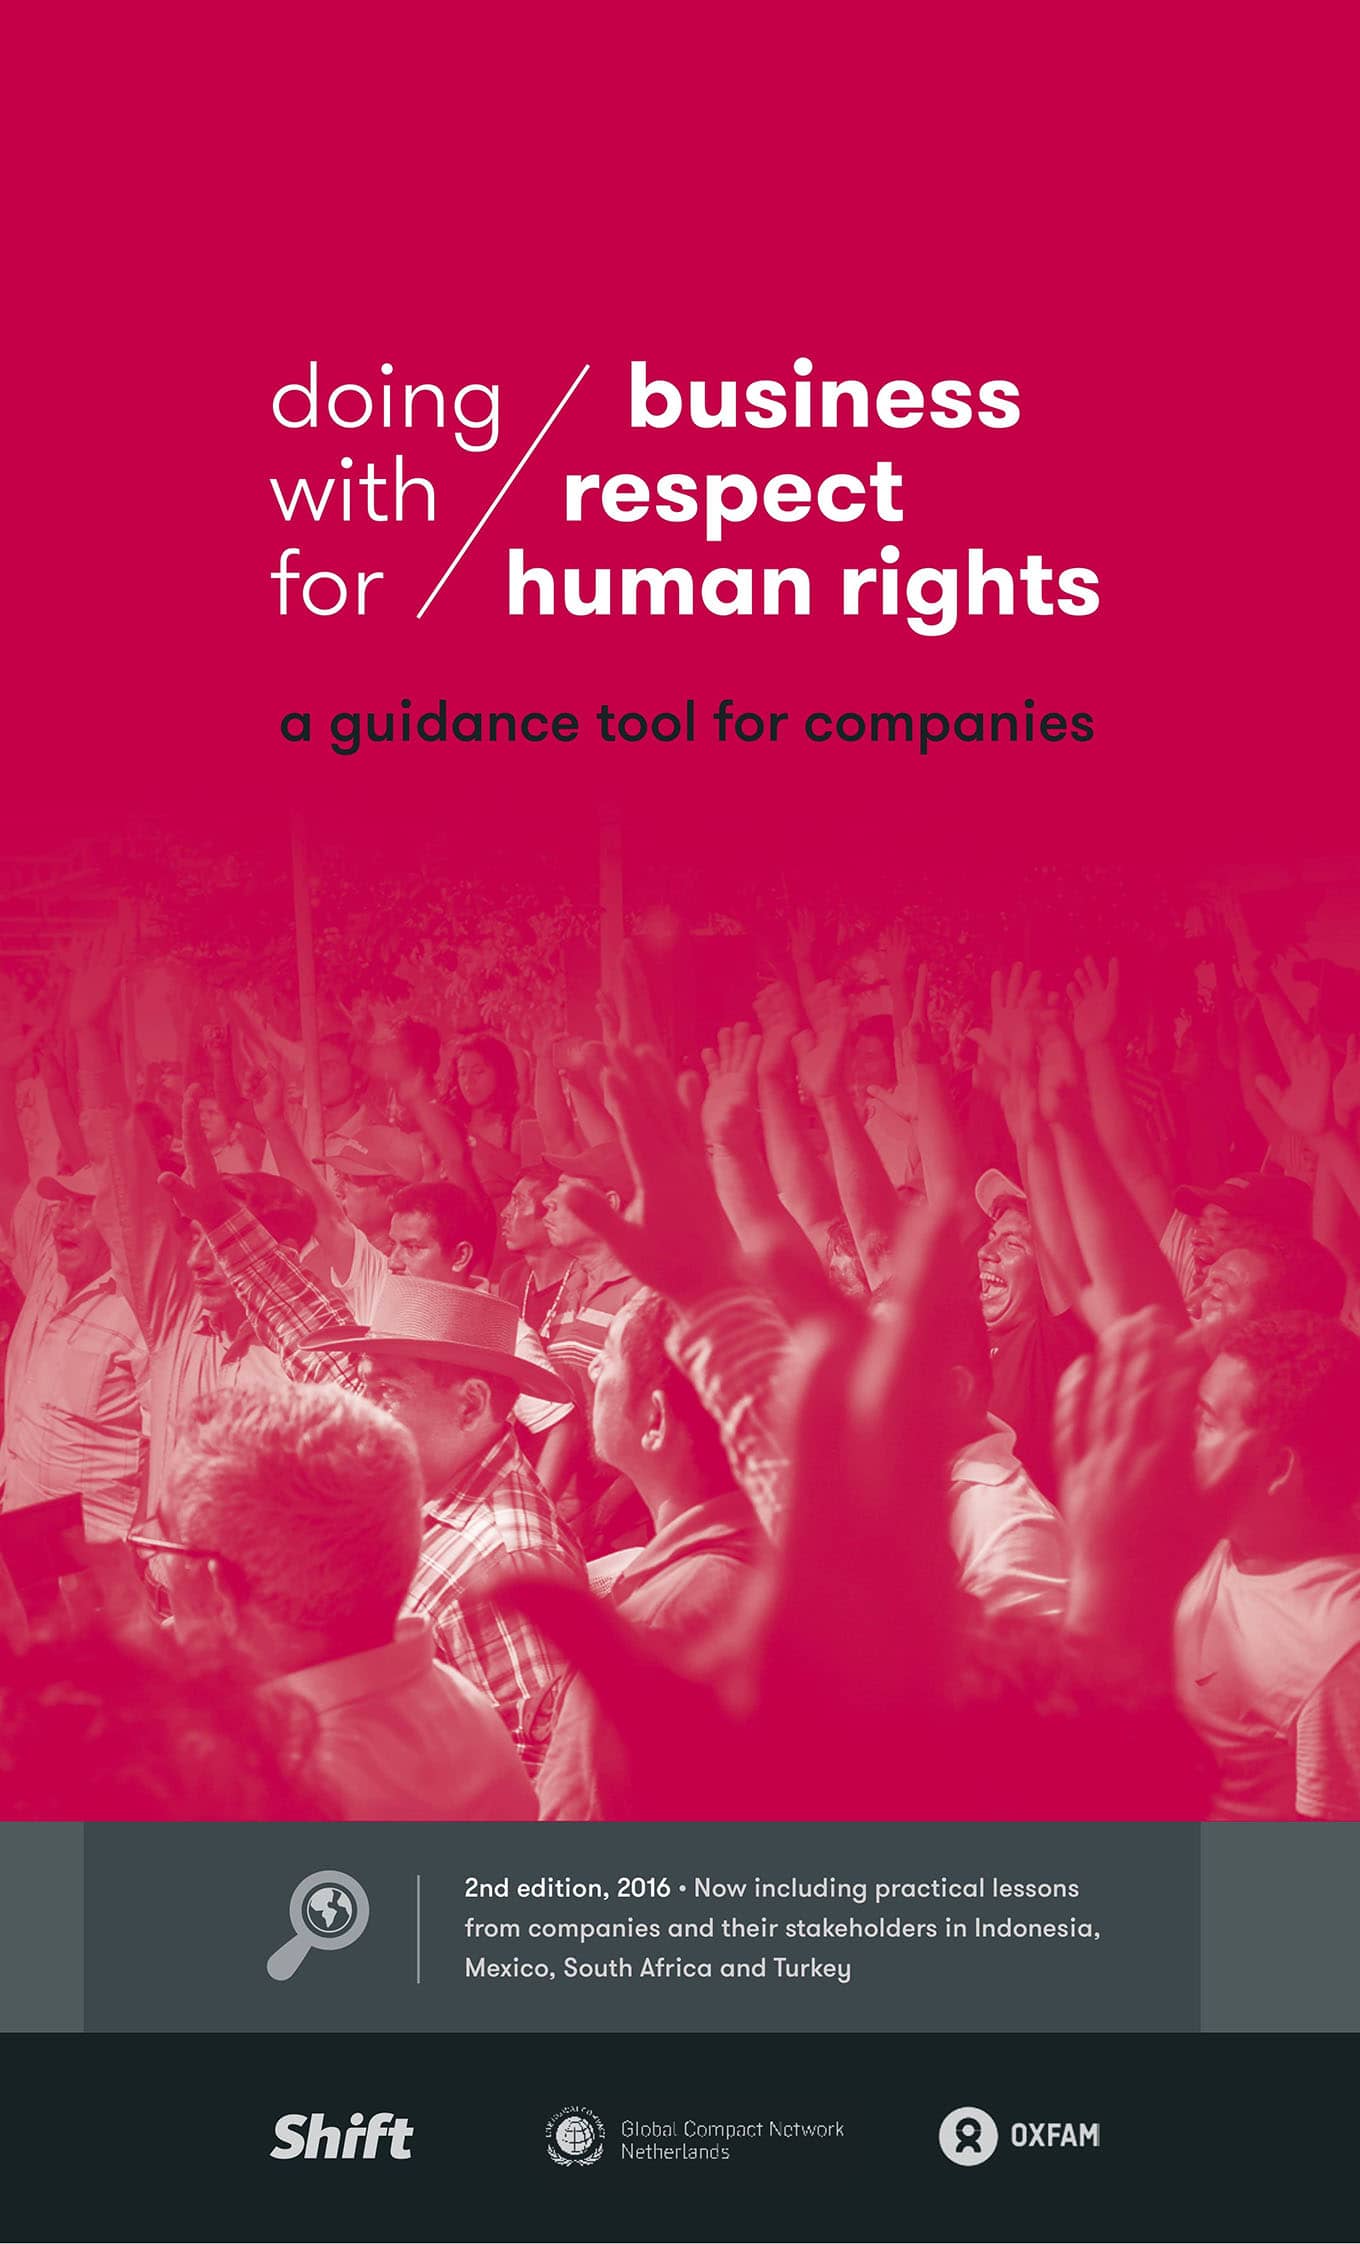 Doing Business with Respect for Human Rights: A Guidance Tool for Companies (Shift, Oxfam and Global Compact Network Netherlands, 2016)